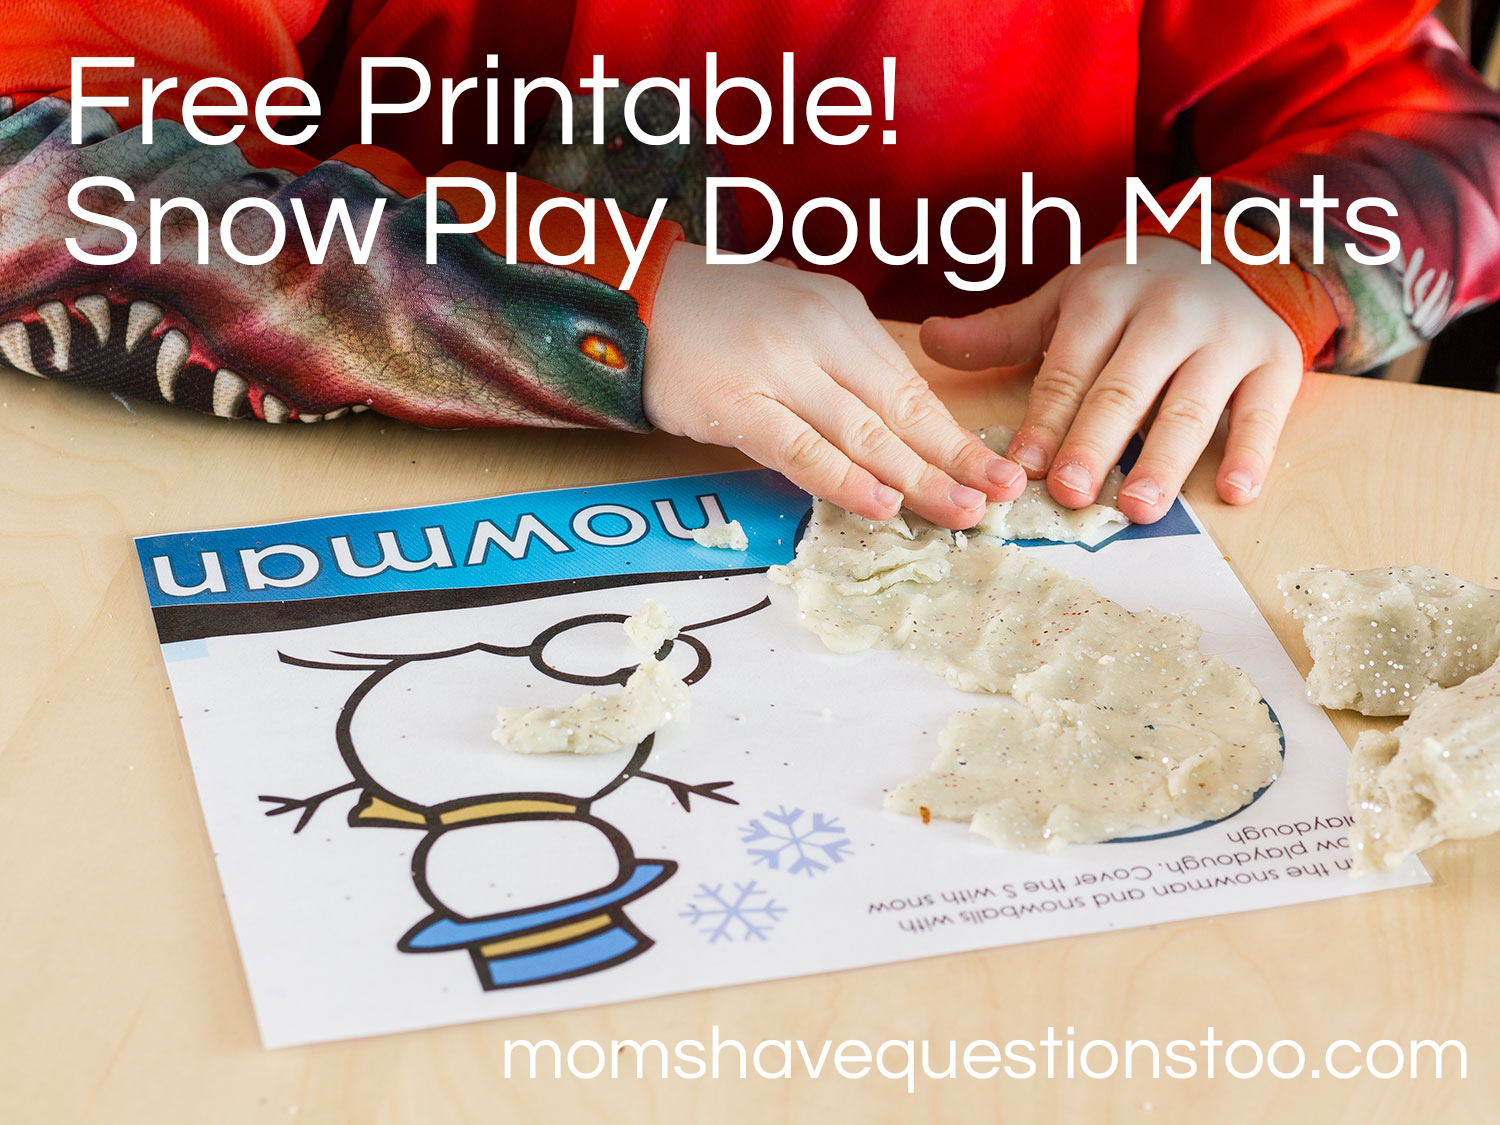 Free Printable Snow Play Dough Mats -- Moms Have Questions Too